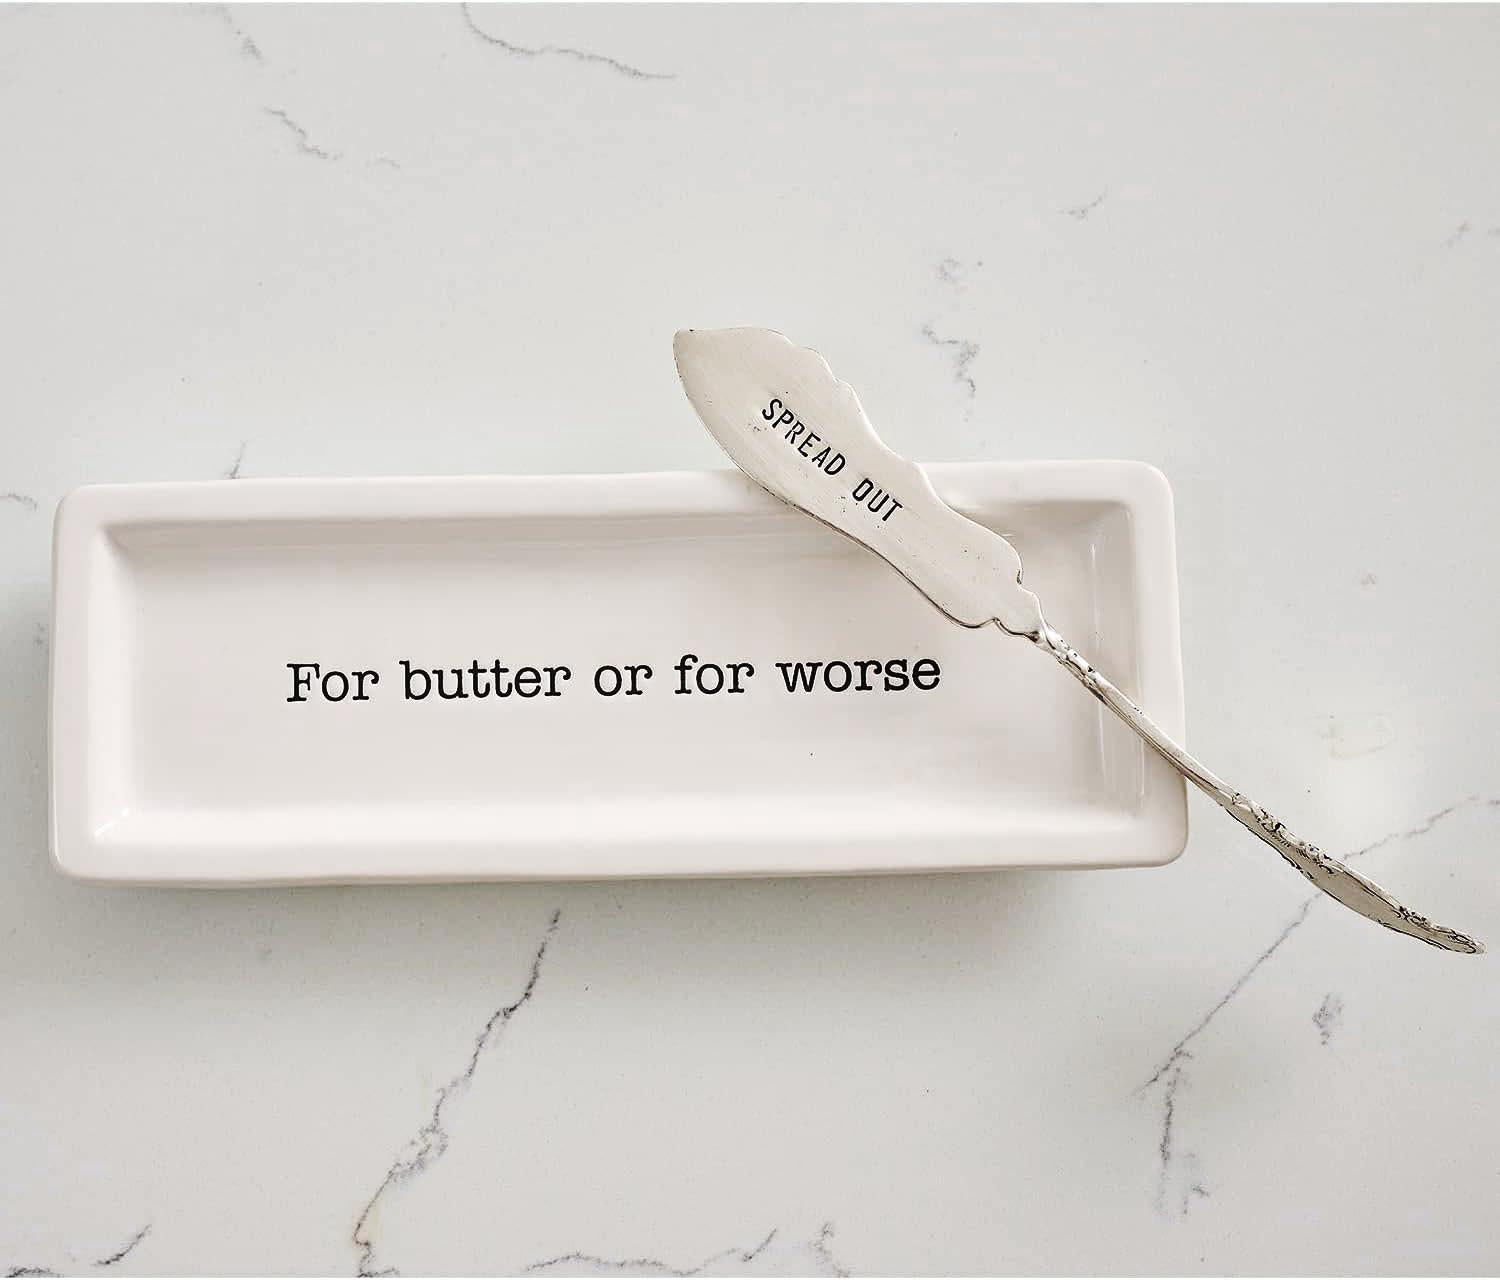 "For butter or for worse" Ceramic Butter Dish Set